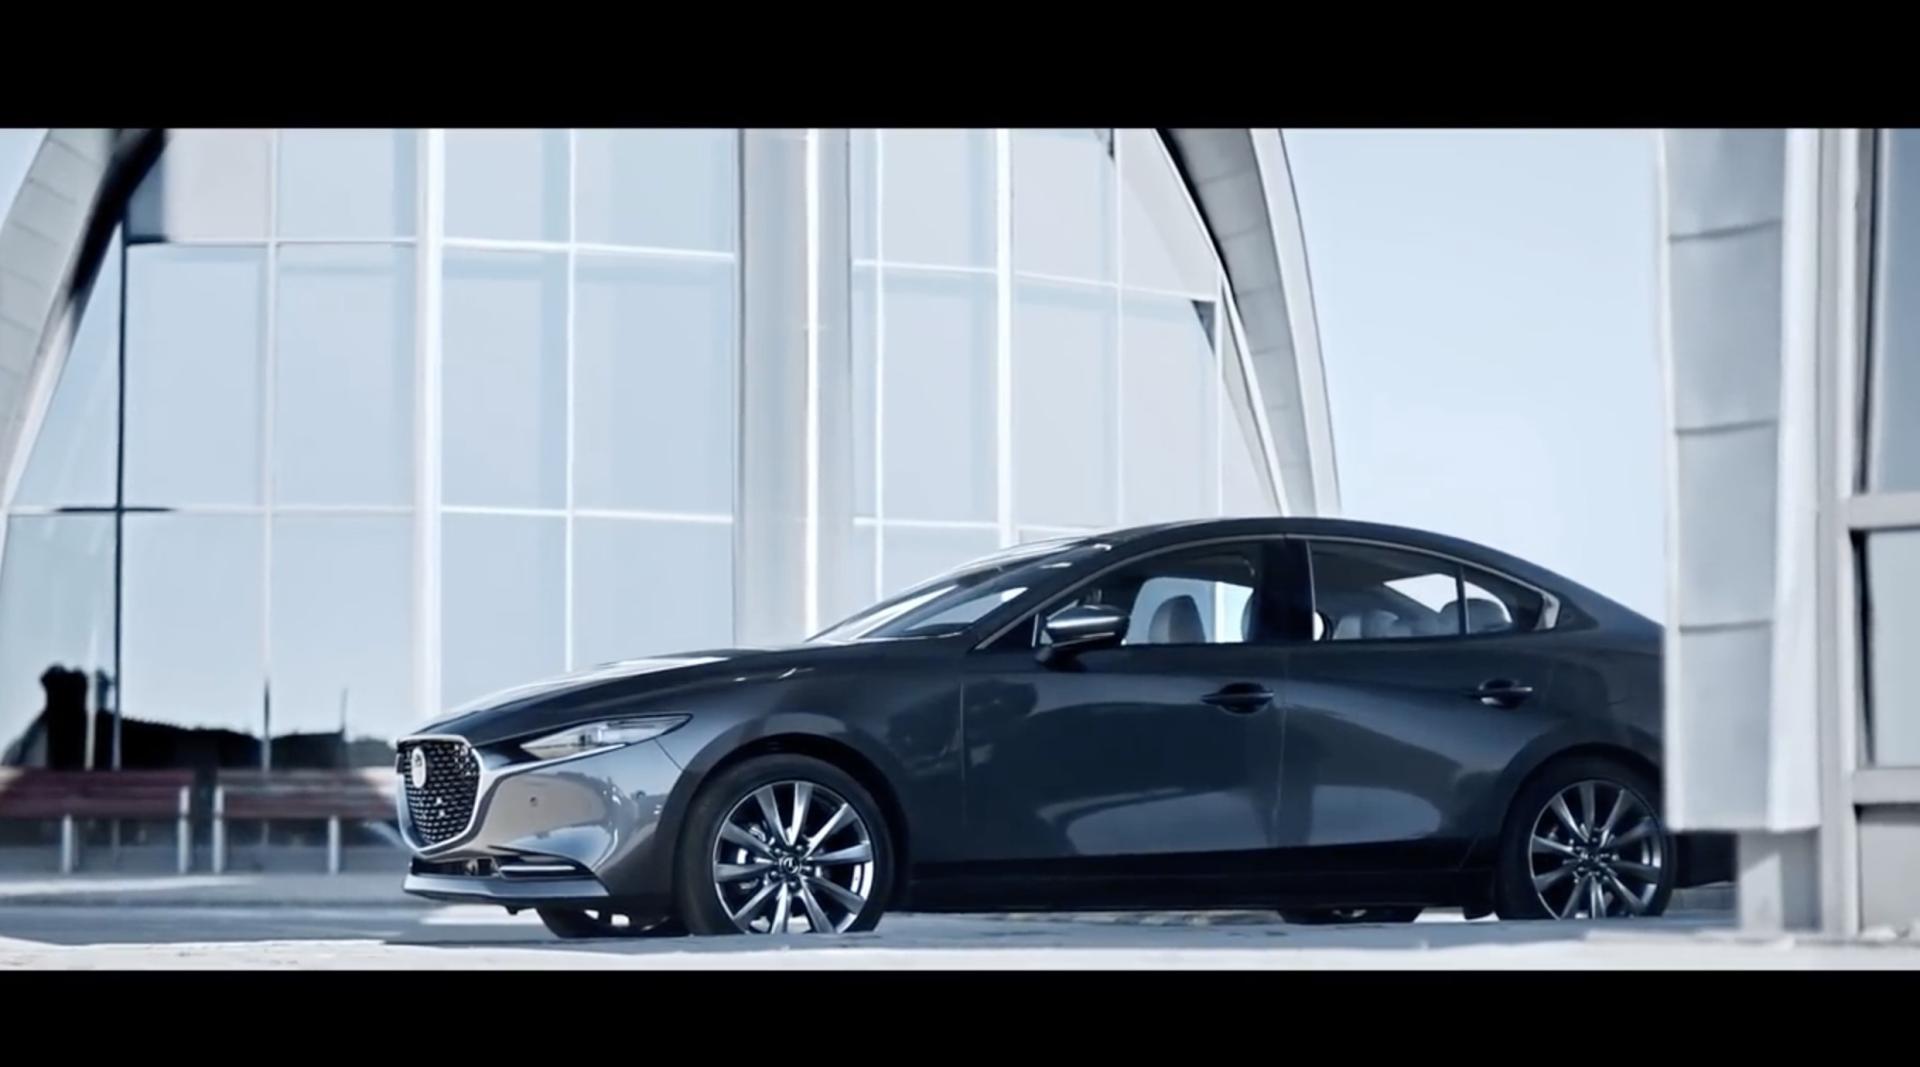 2020 Mazda 3 All-new Official Trailer